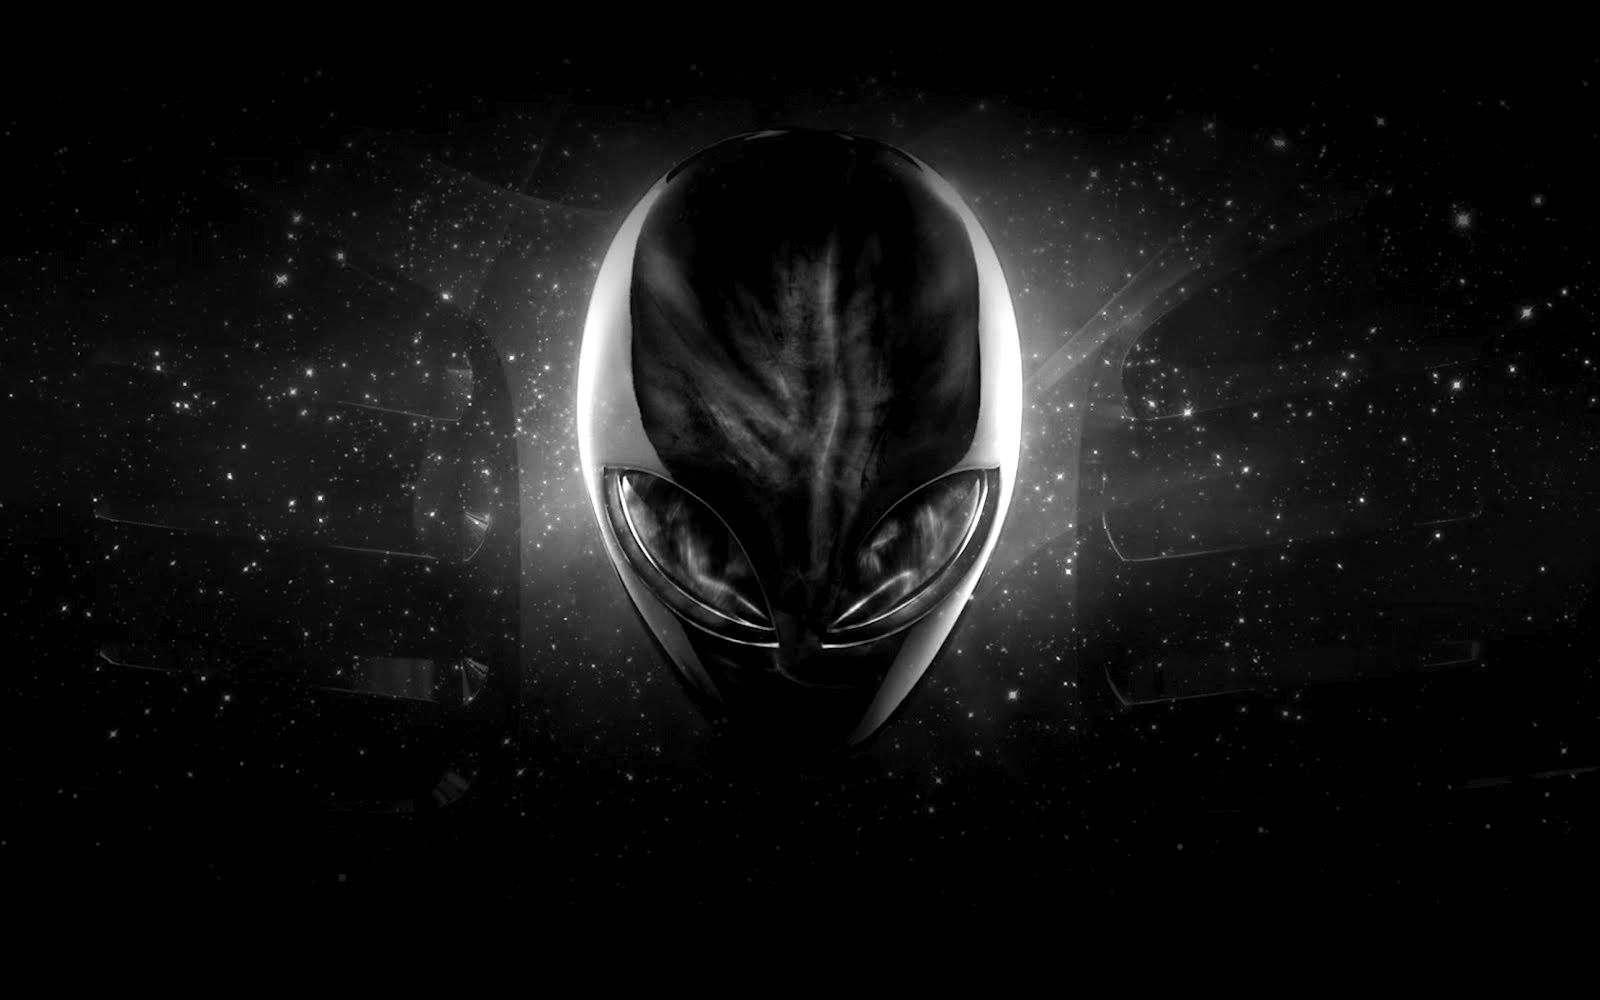 Download The Best Alien Wallpapers Here Aliens and UFO Sightings